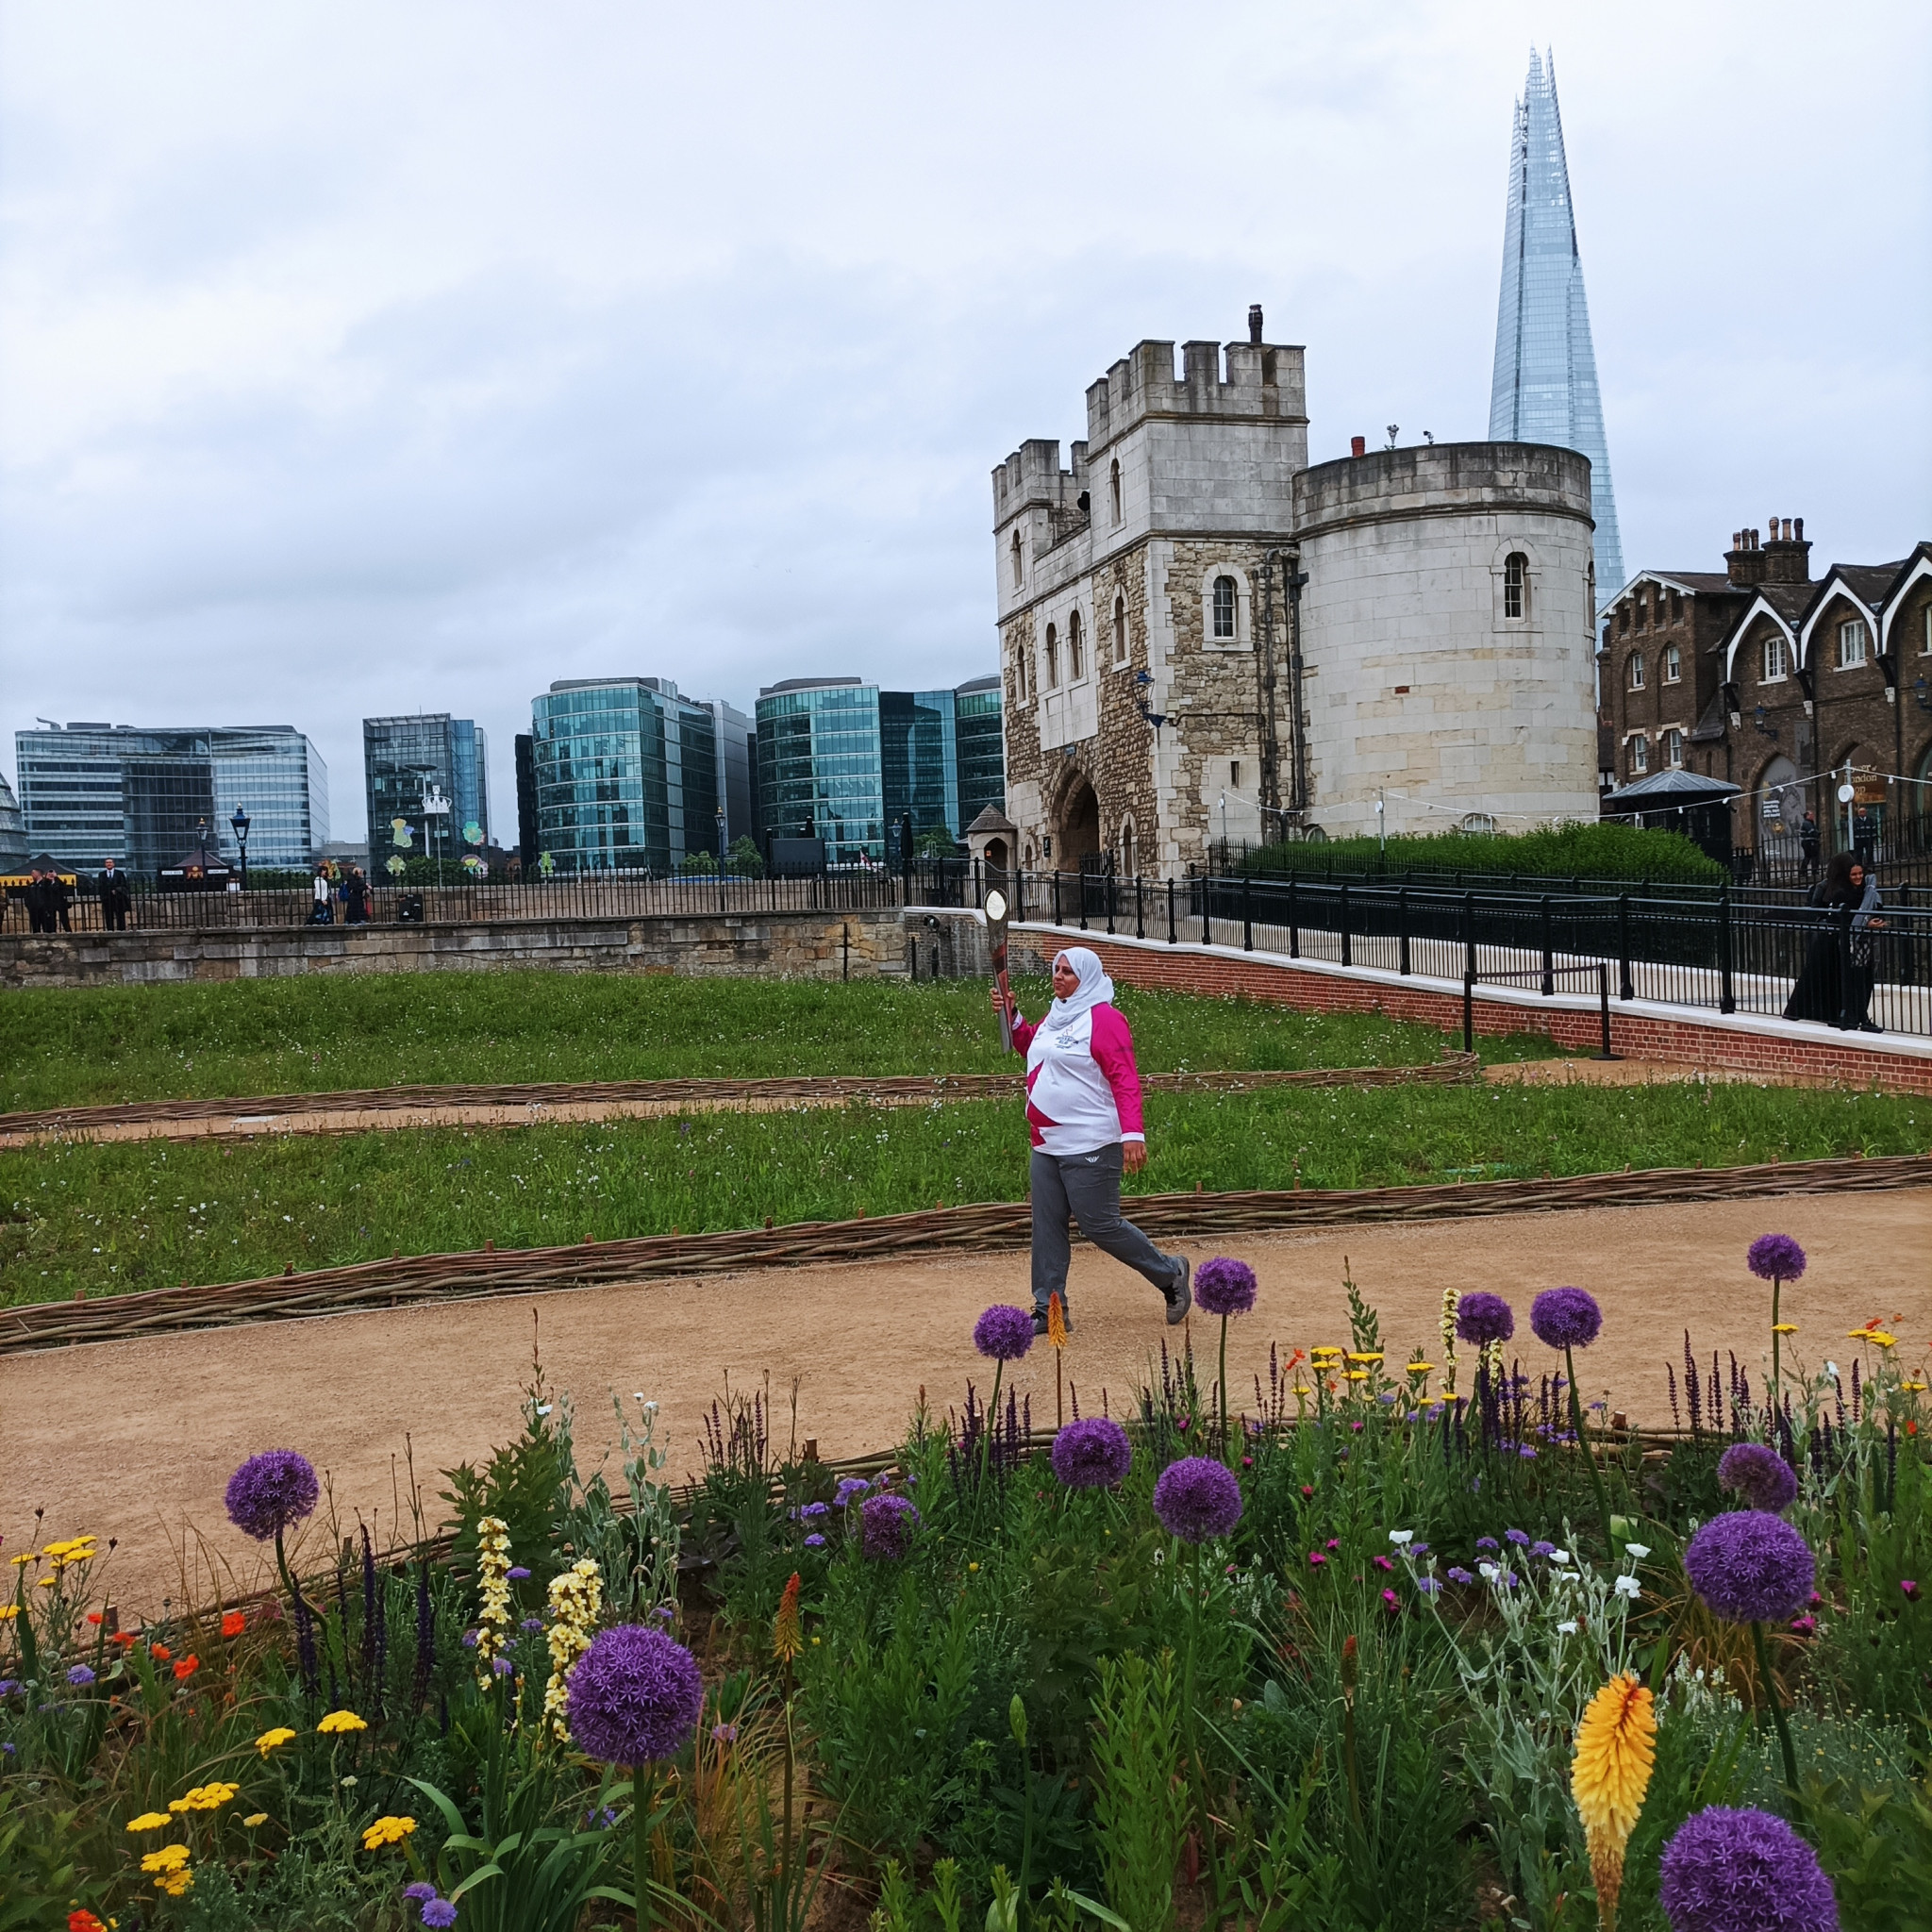 The walls of the Tower of London and the Shard provide a backdrop of contrasts as the Queen's Baton continued its journey ©ITG